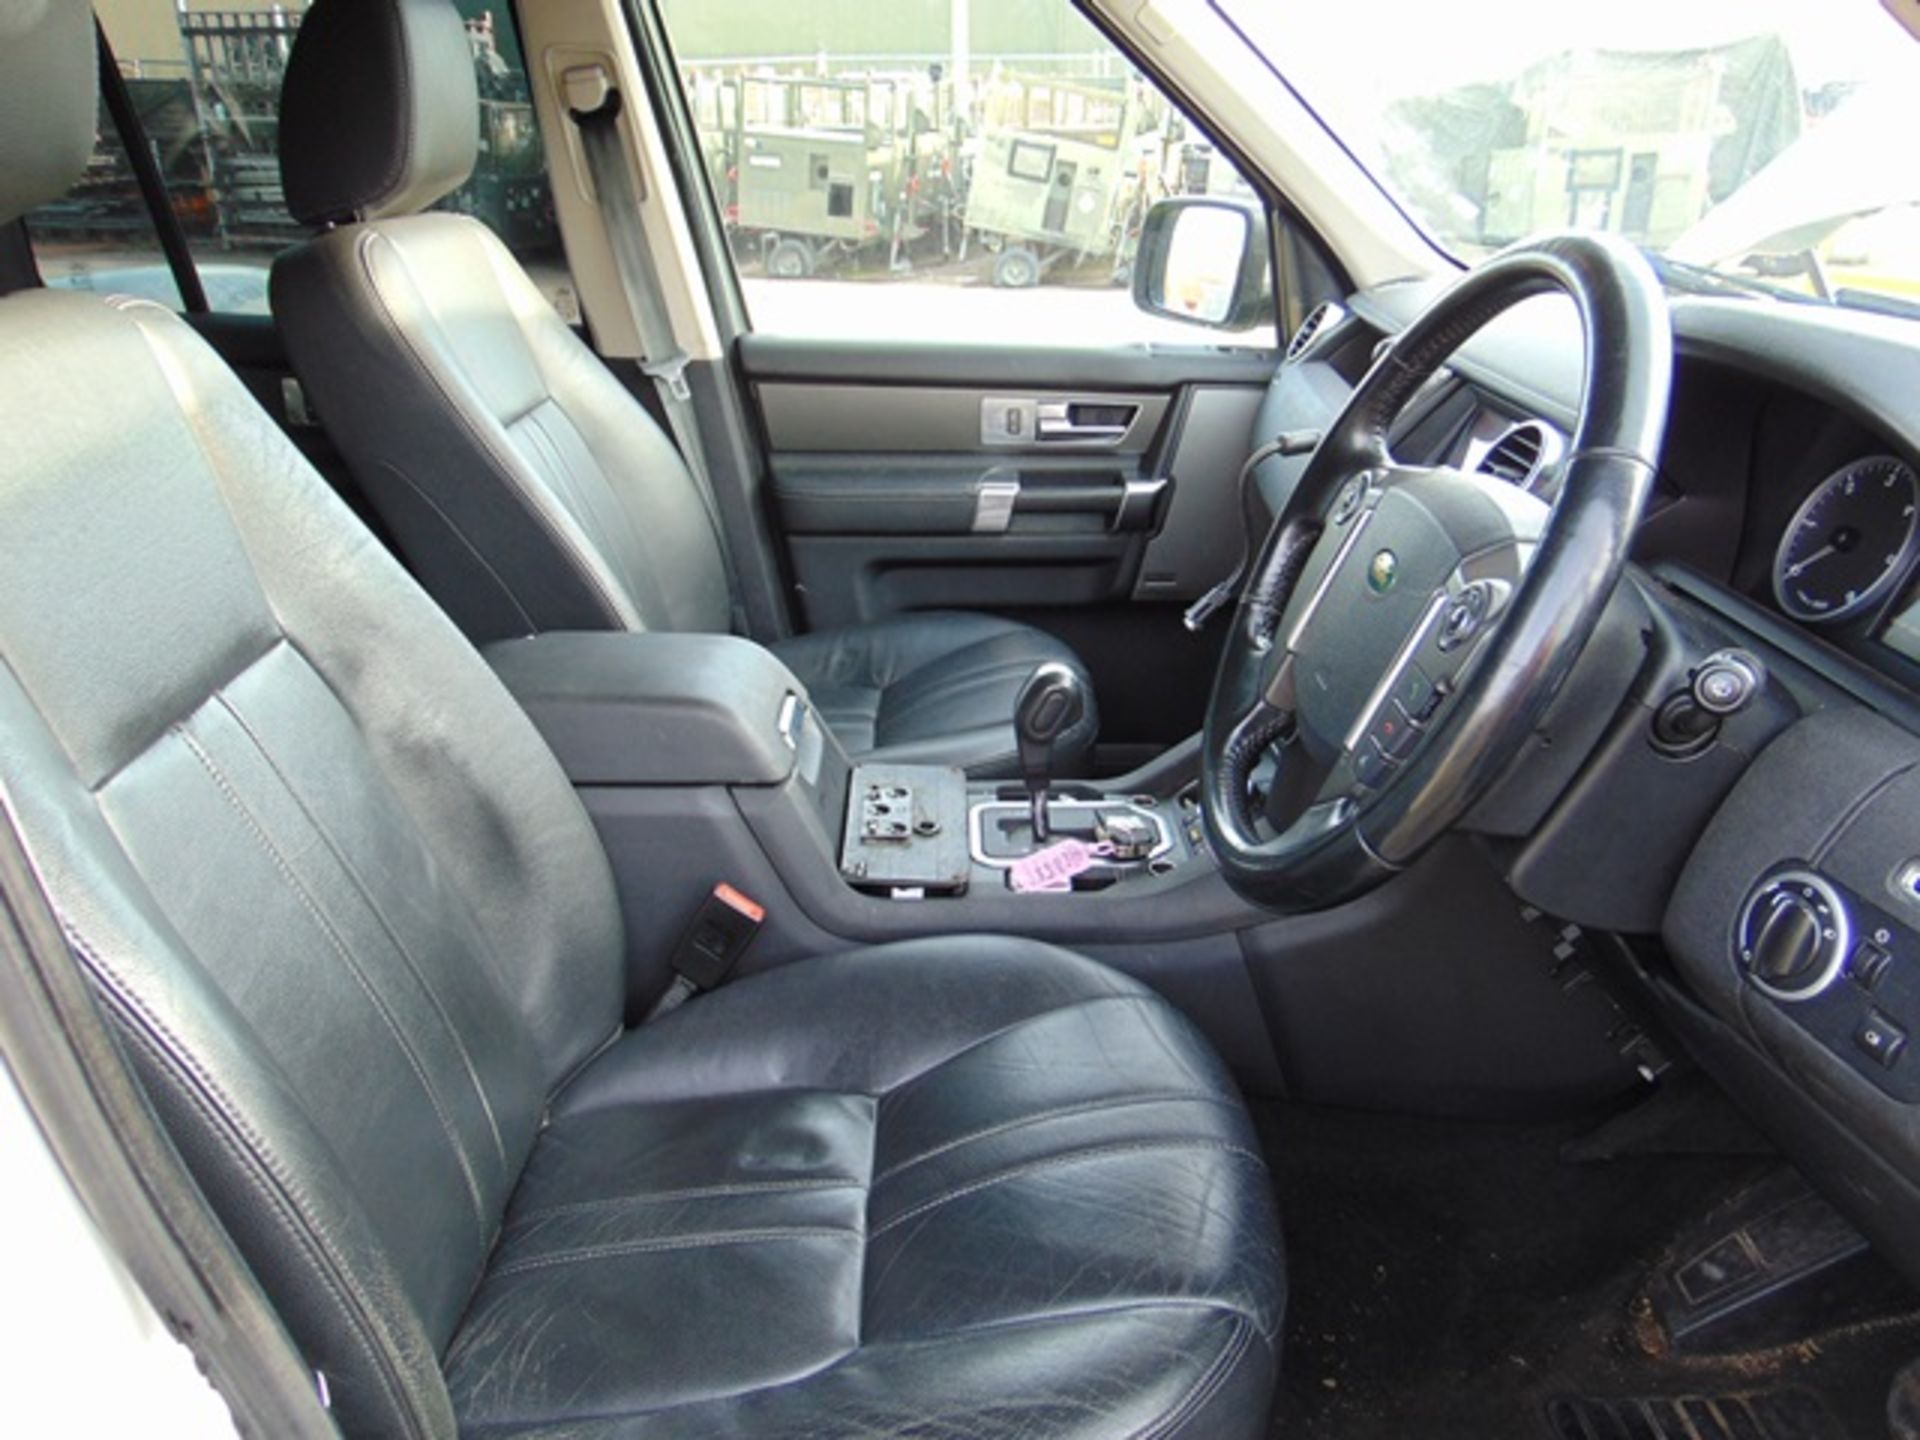 2010 Land Rover Discovery 4 3.0 TDV6 GS - Image 13 of 21